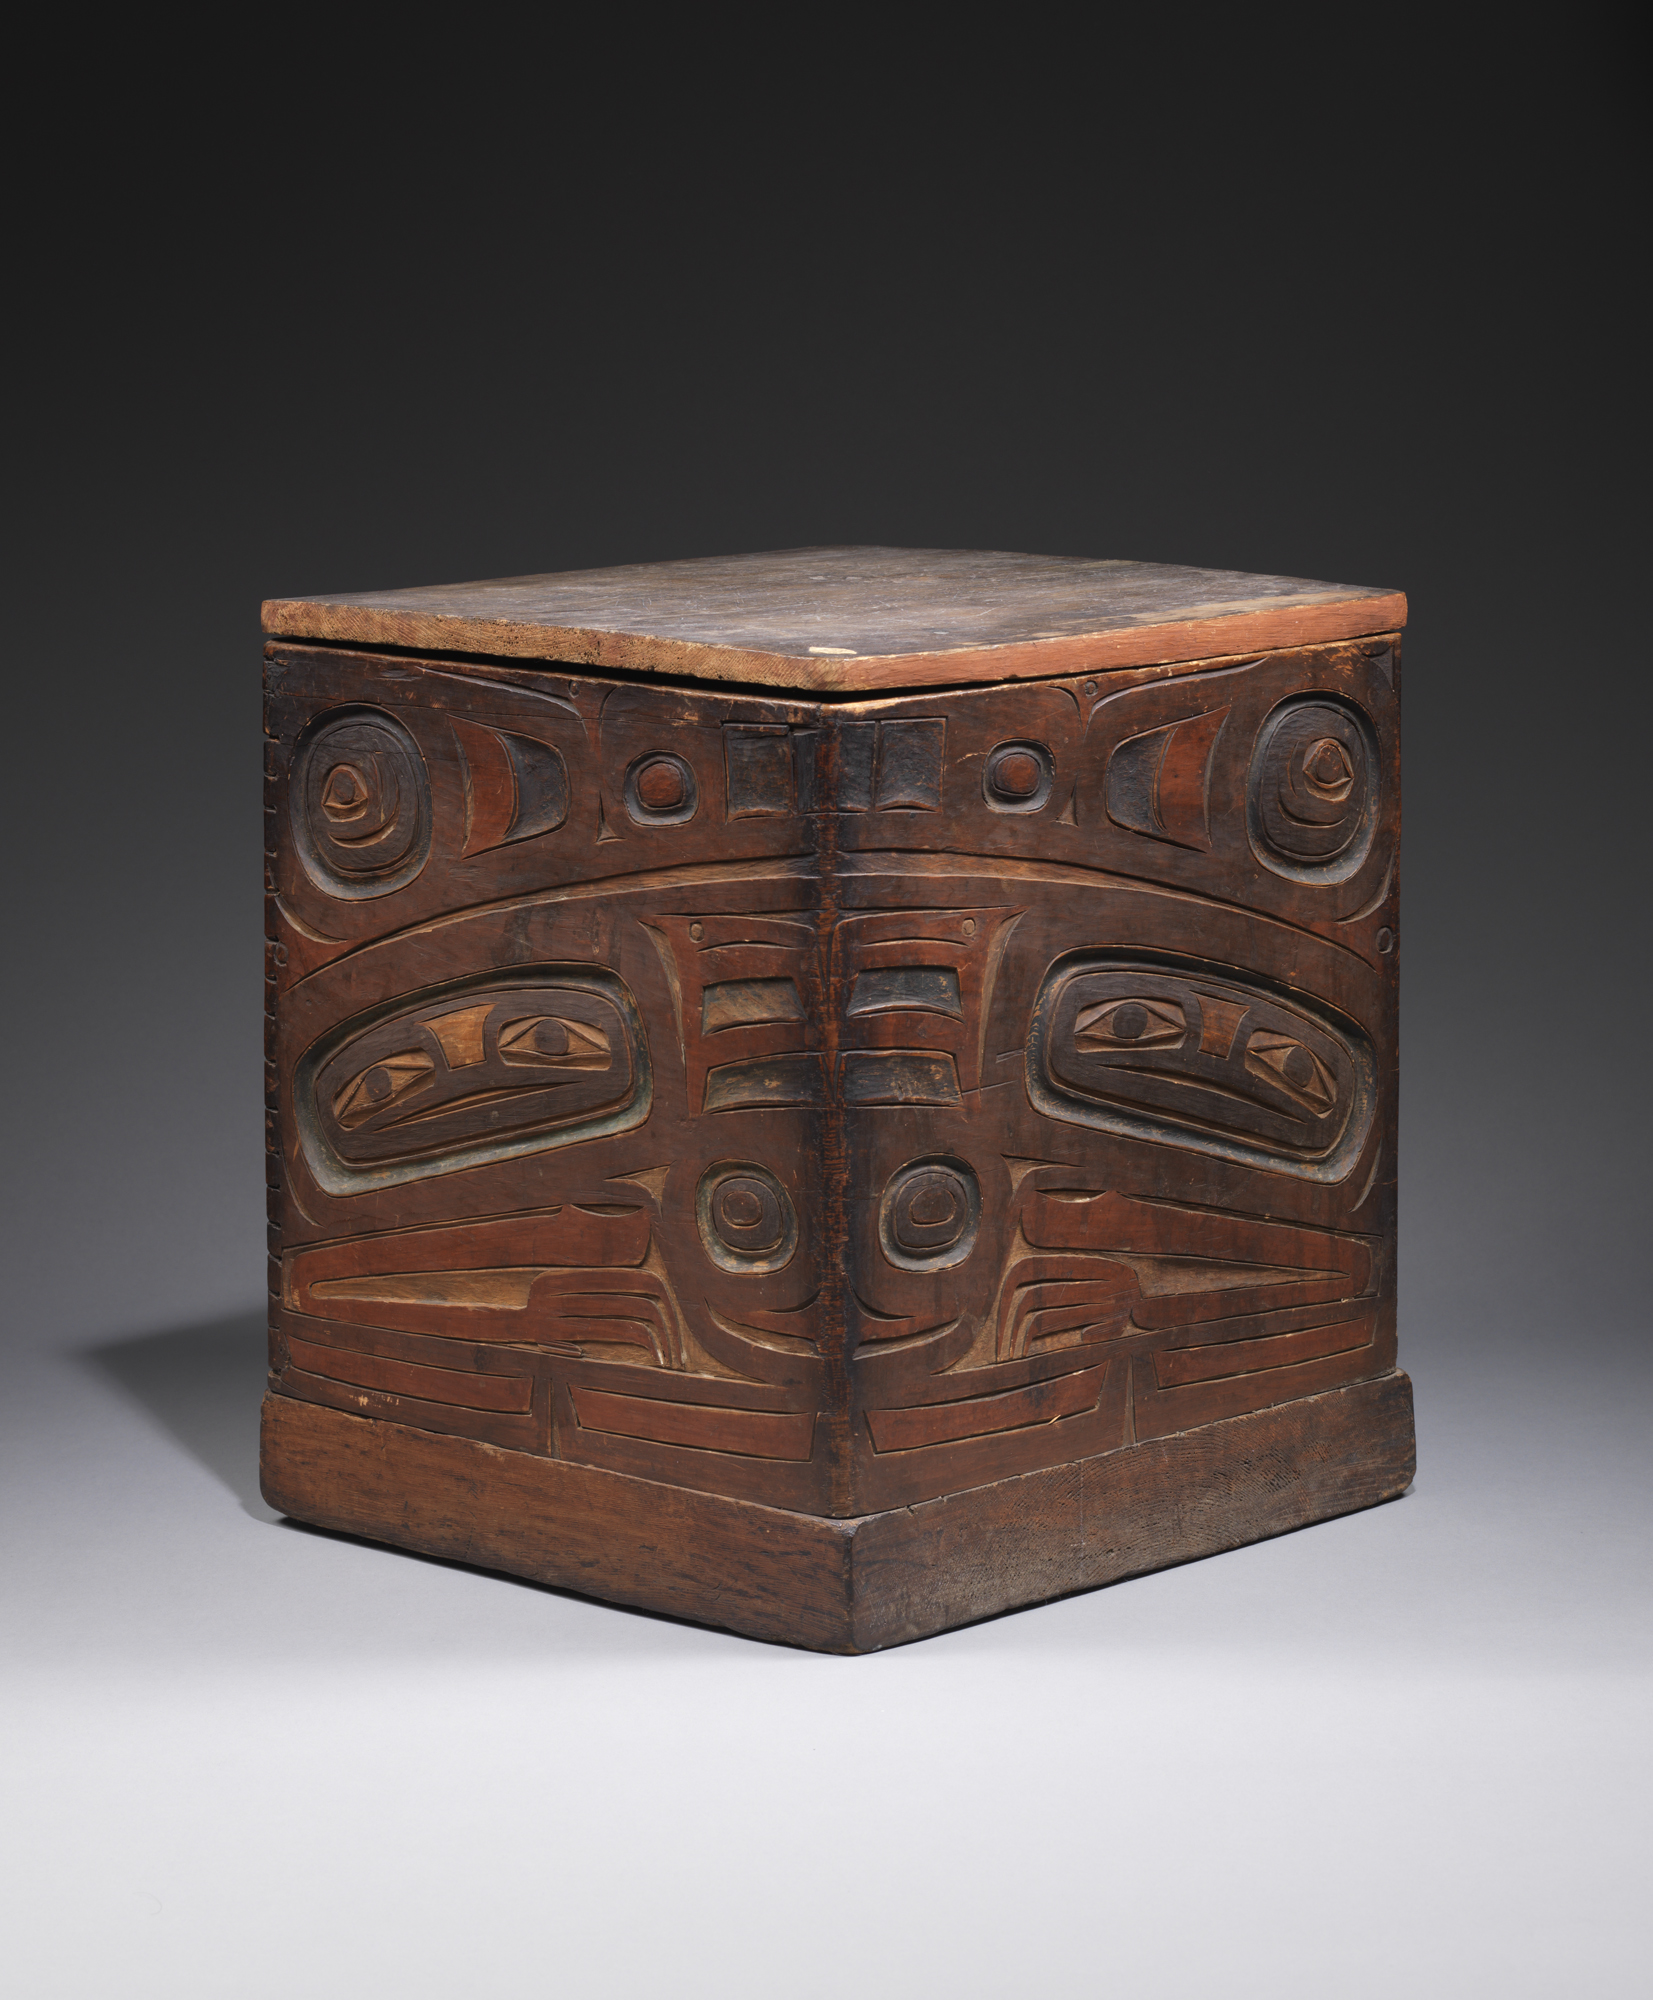 Tlingit. Chest and lid with painted totemic carving, 19th century. Wood painted in shades of red, black, and sea green with cedar or spruce stitching. Lent by the Department of Geology and Geophysical Sciences, Princeton University.